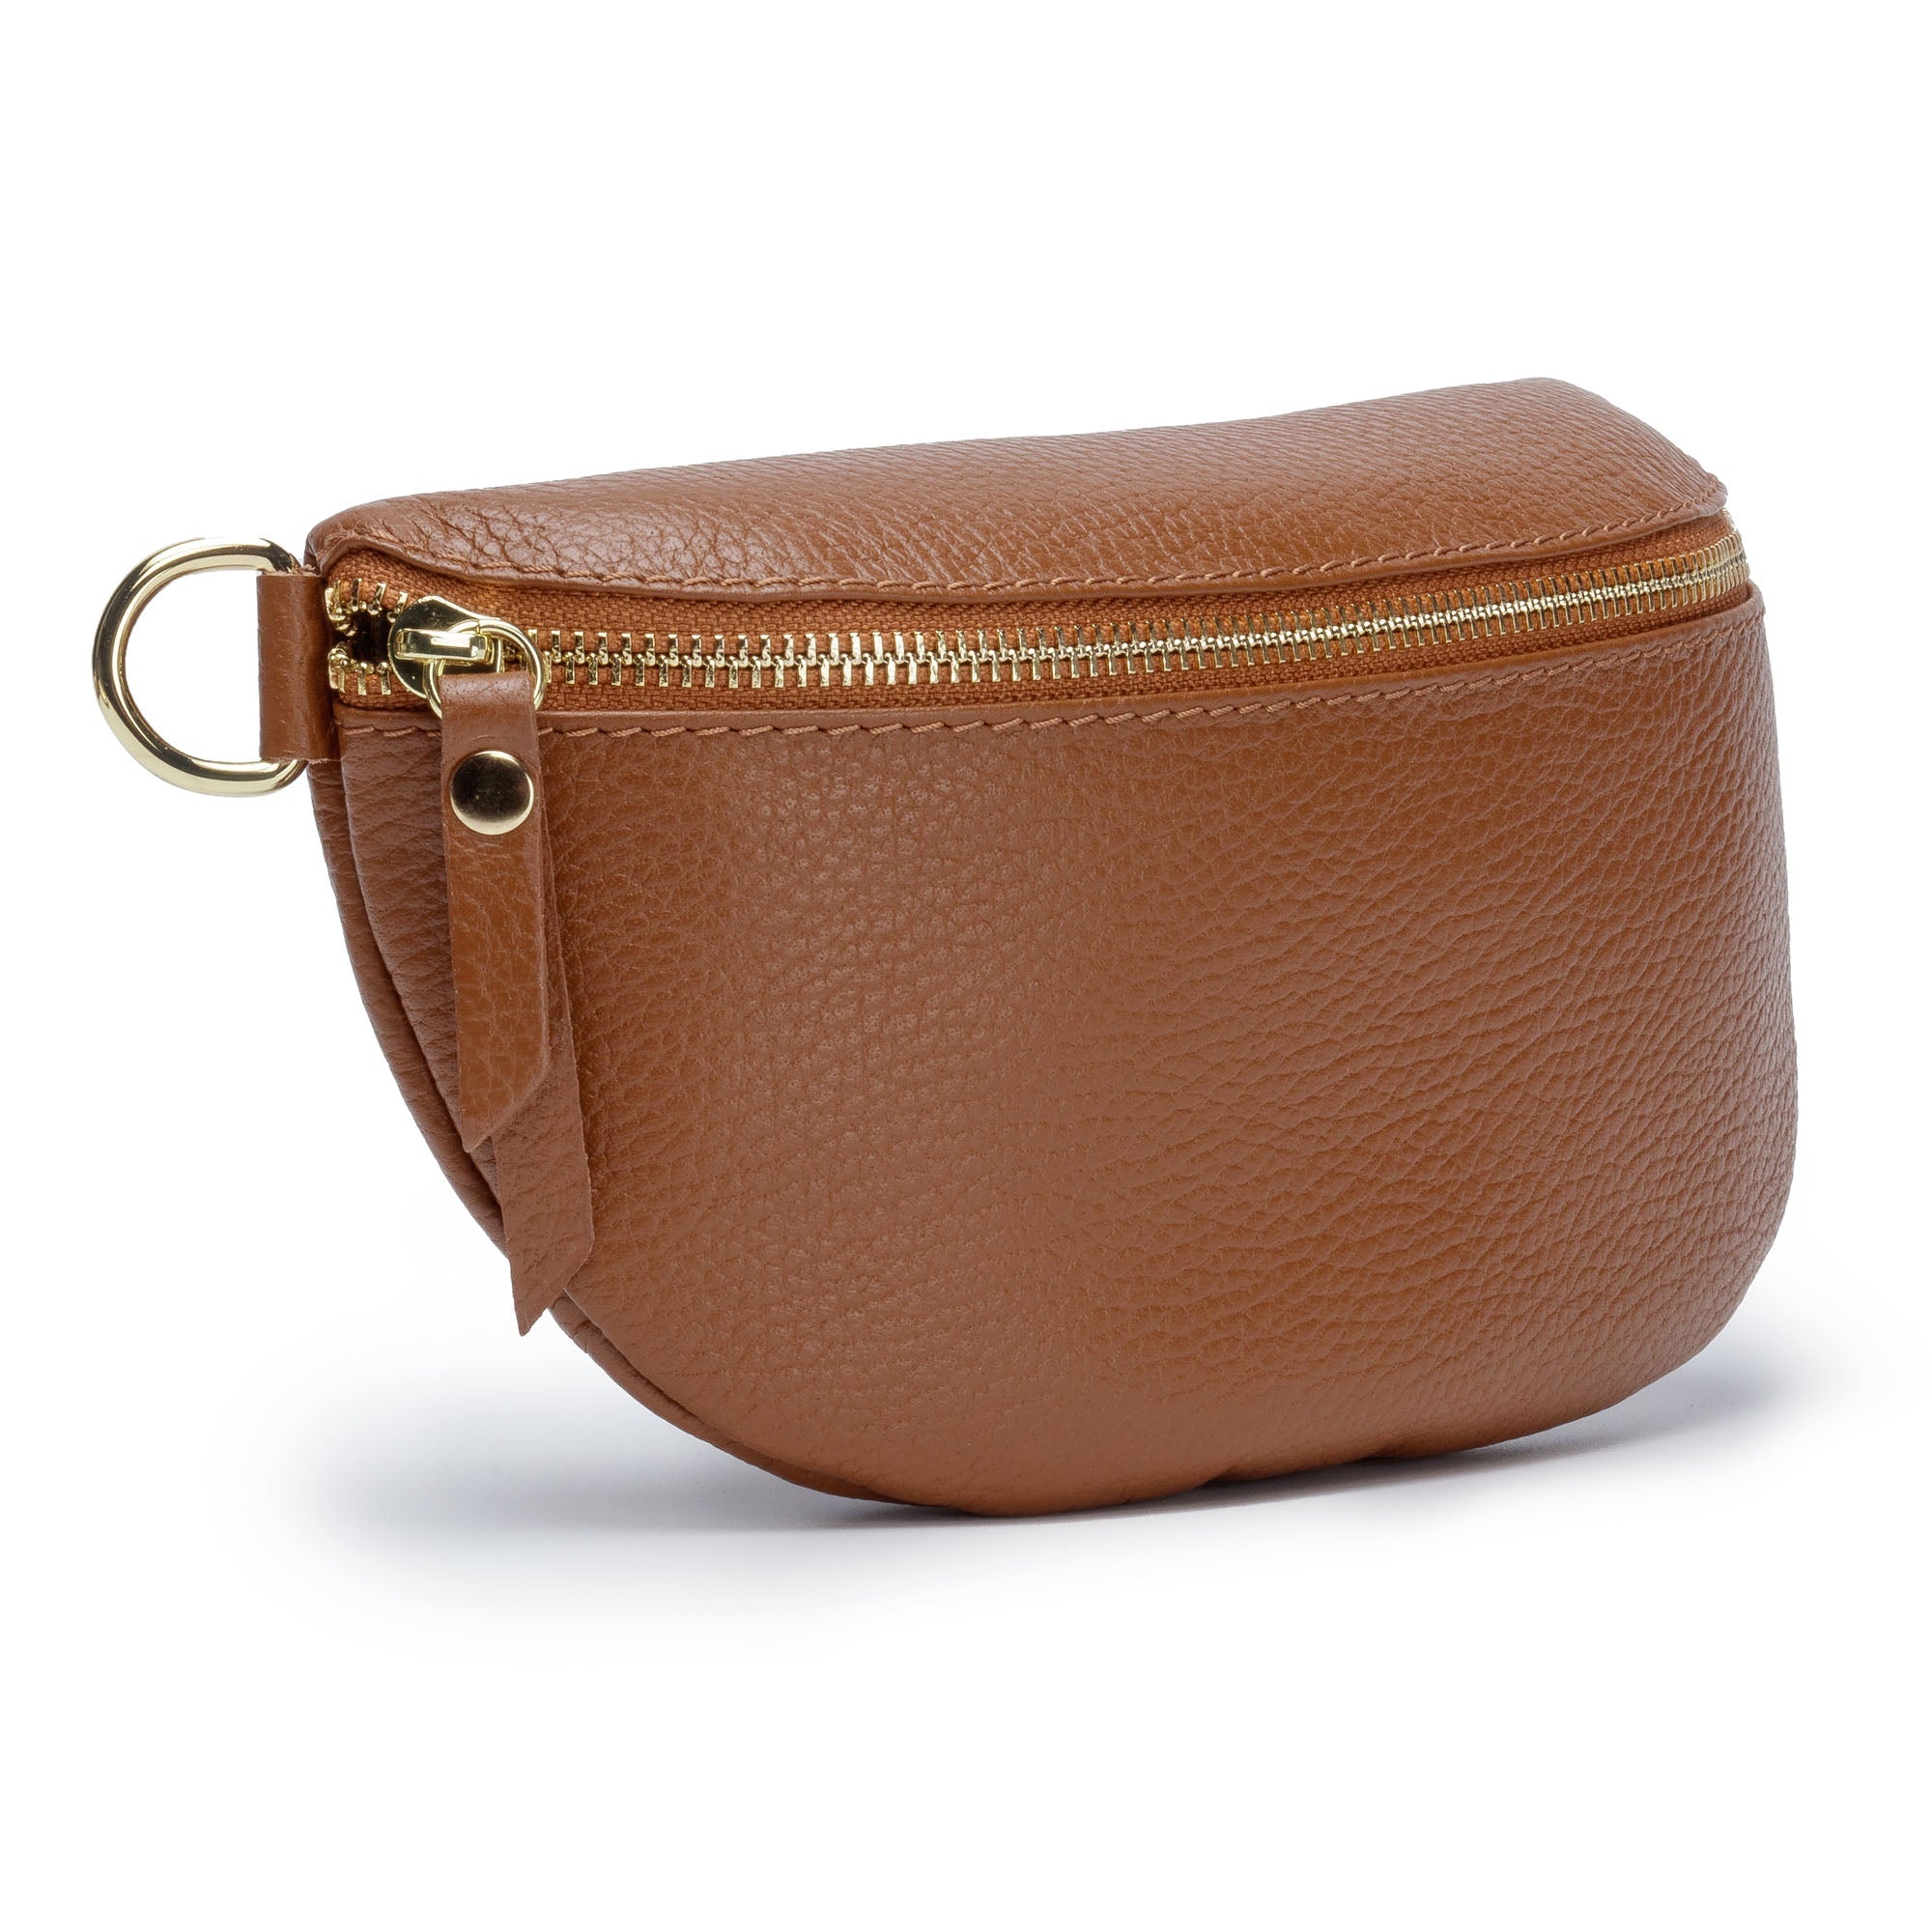 Sling Bag - Tan with Navy Copper Strap